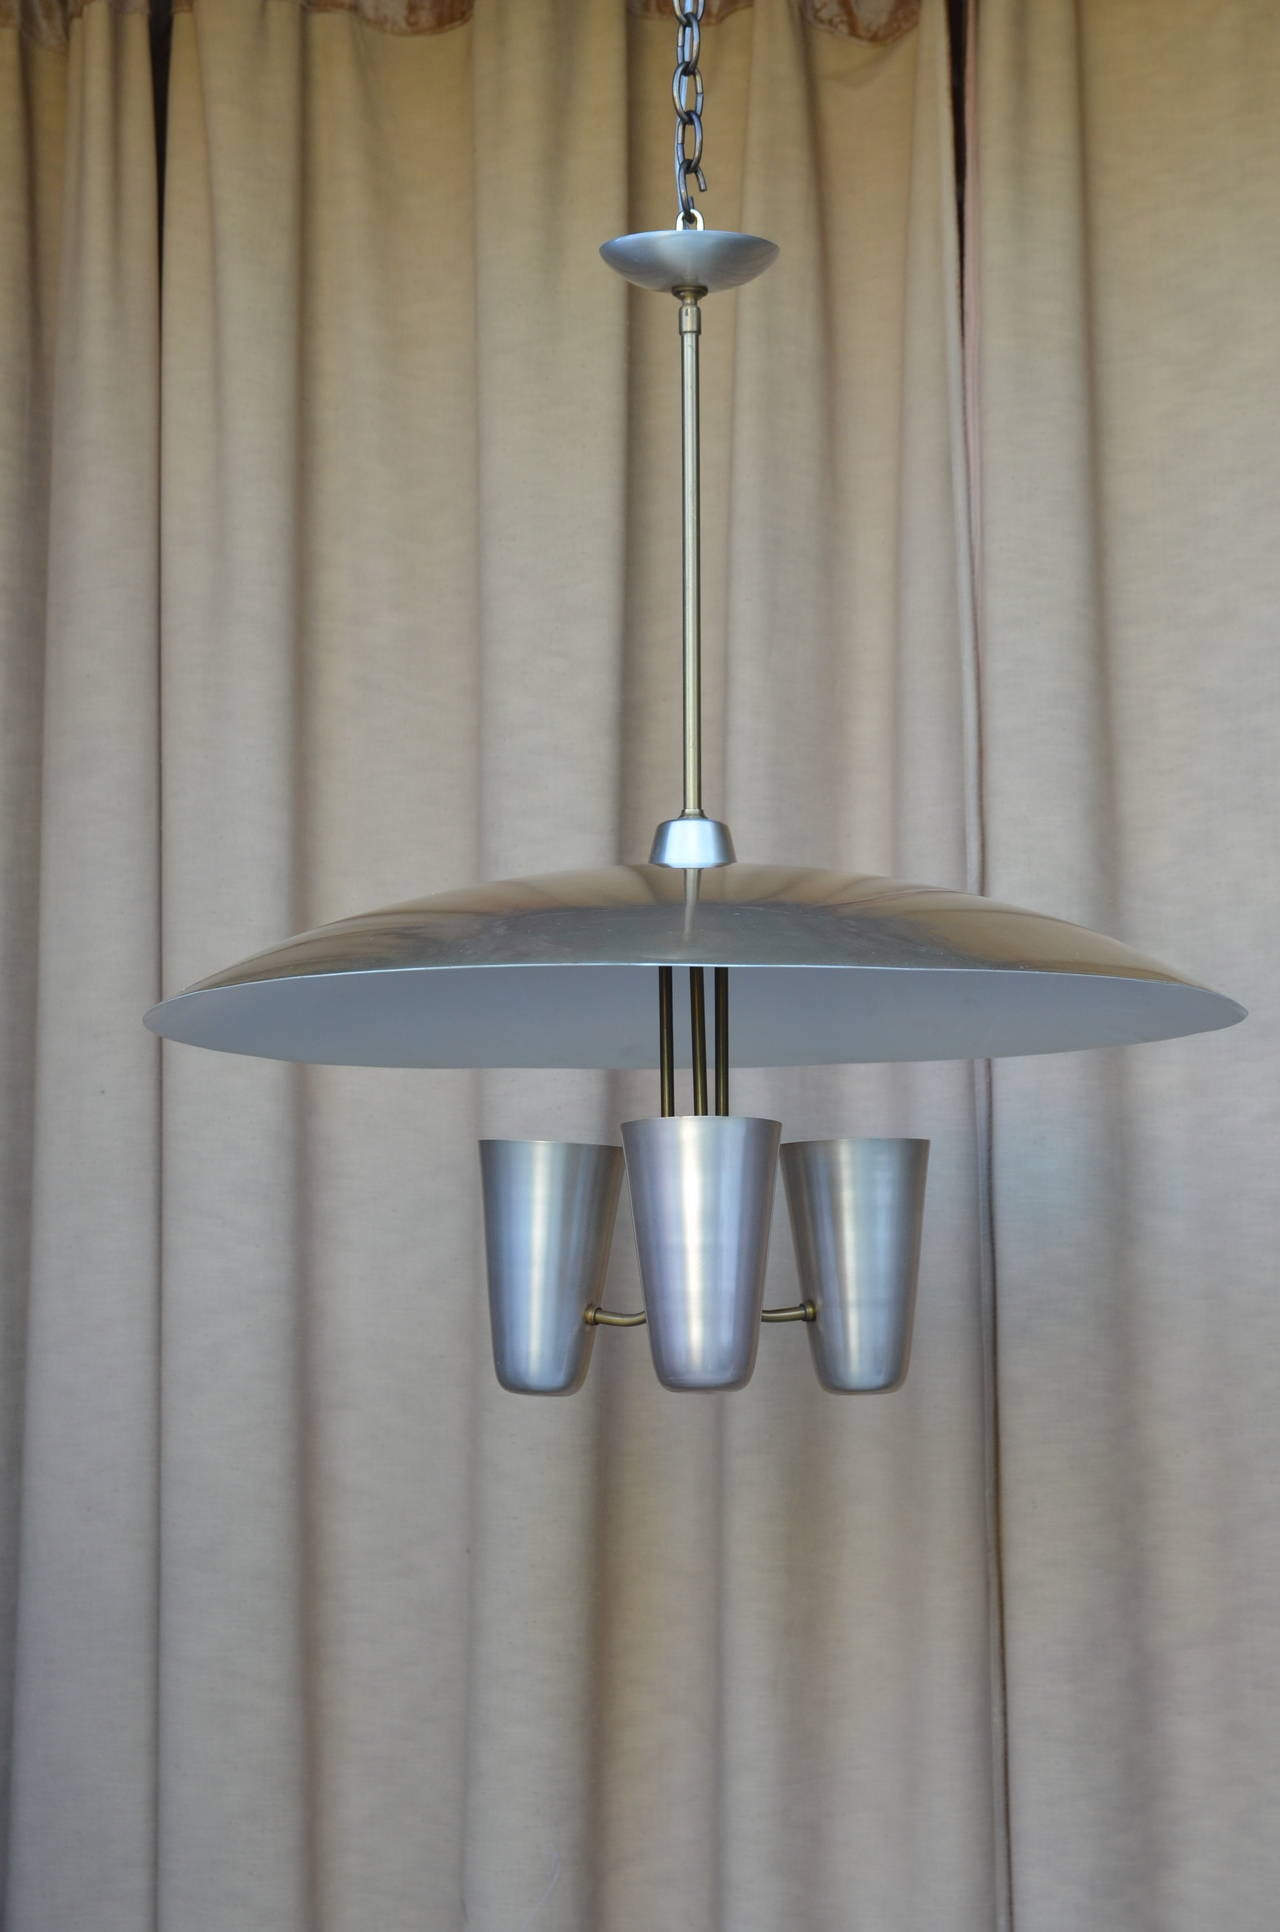 Spectacular Gerald Thurston indirect light ceiling fixture for Lightolier. Unusually large and in excellent condition for a vintage piece. Rewired with original stem and canopy.